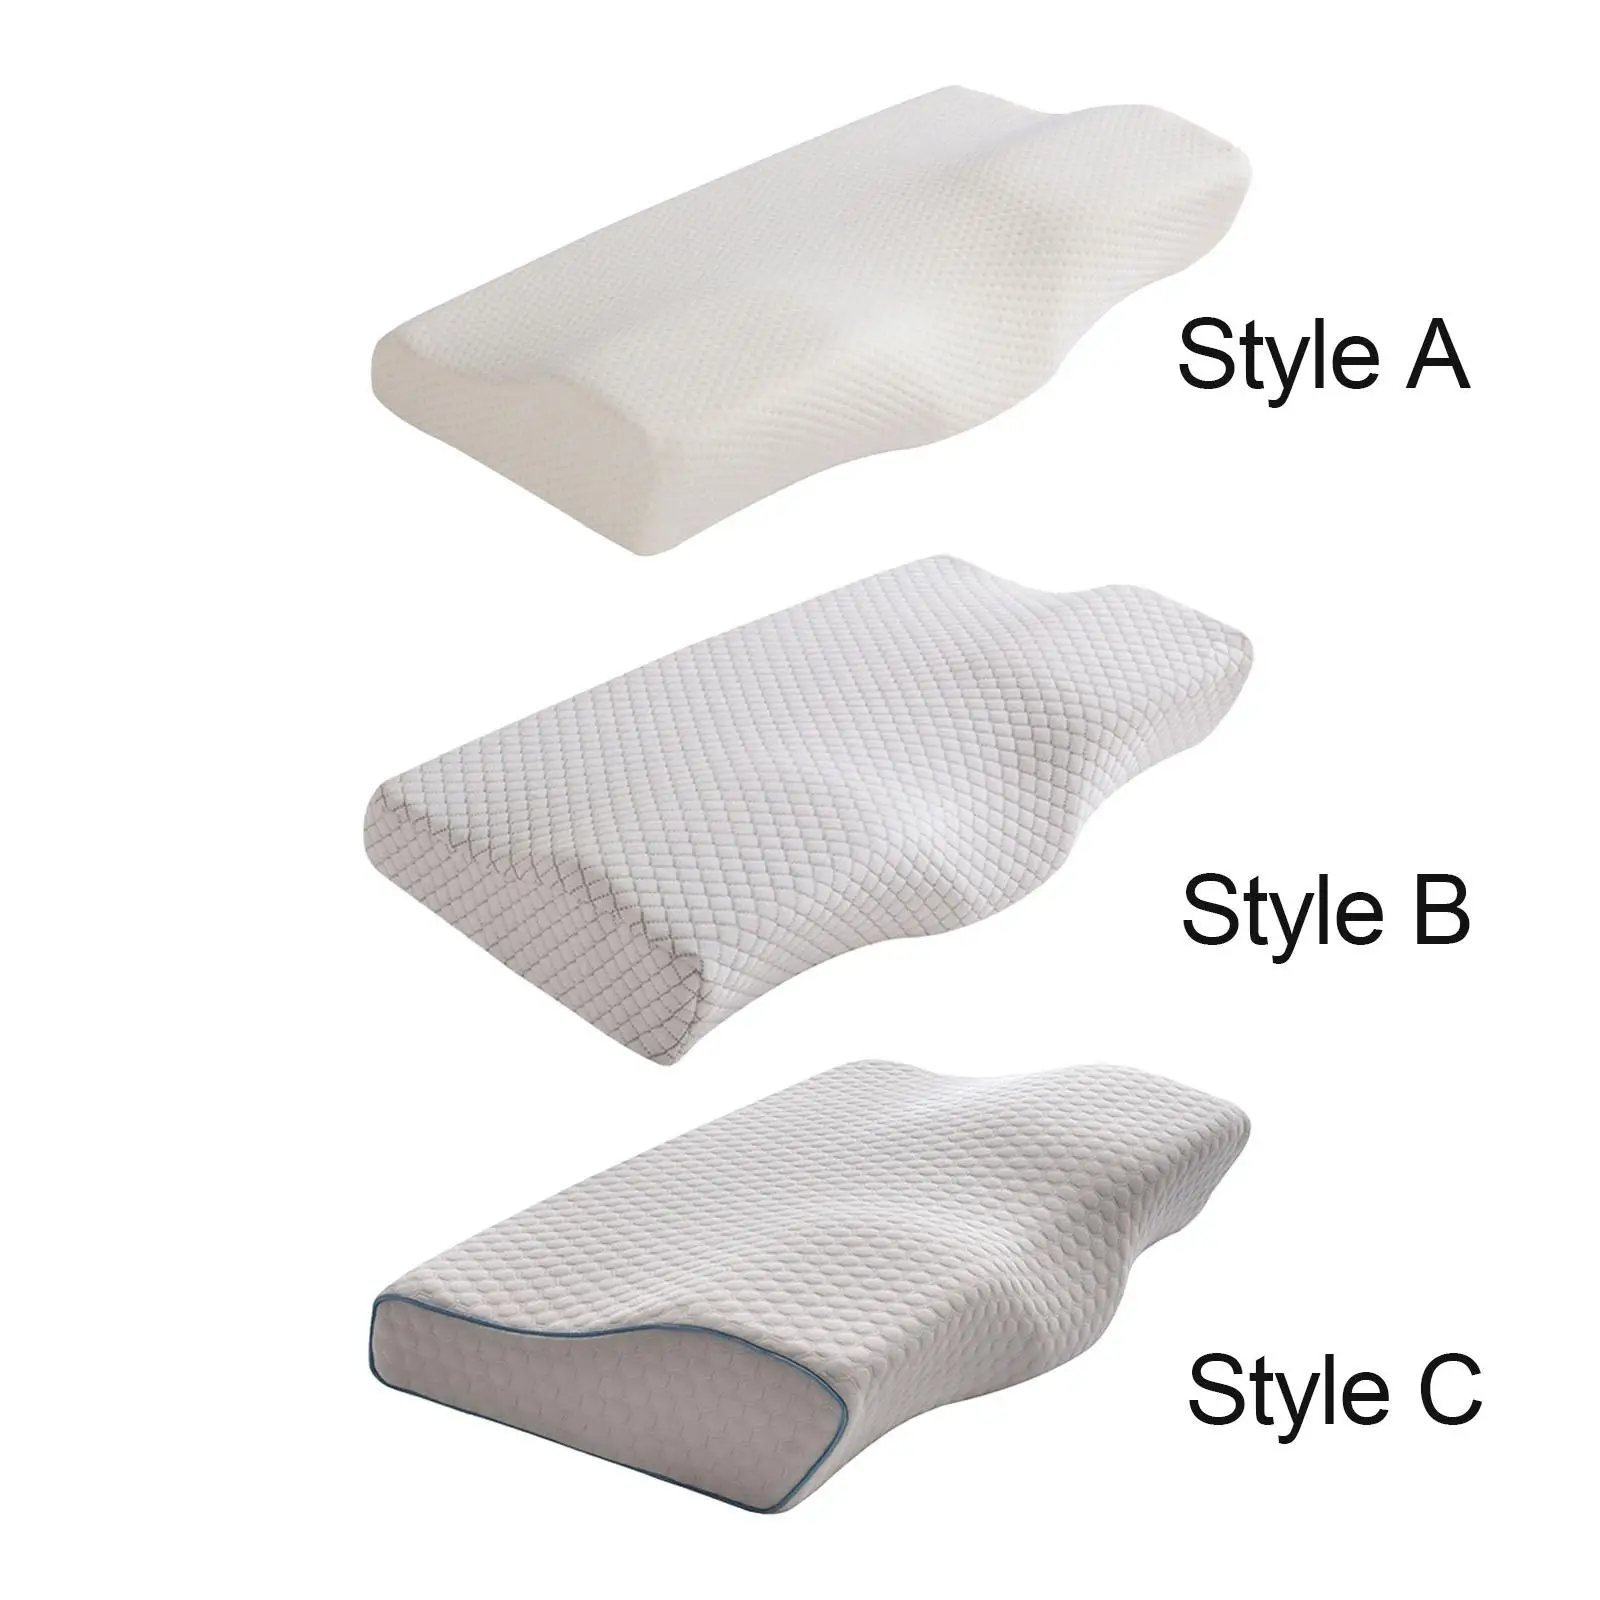 Butterfly Shaped Neck Pillows Cervical Memory Foam Bed Support Pillow for Side Sleepers Home Bedroom Sleeping Adult